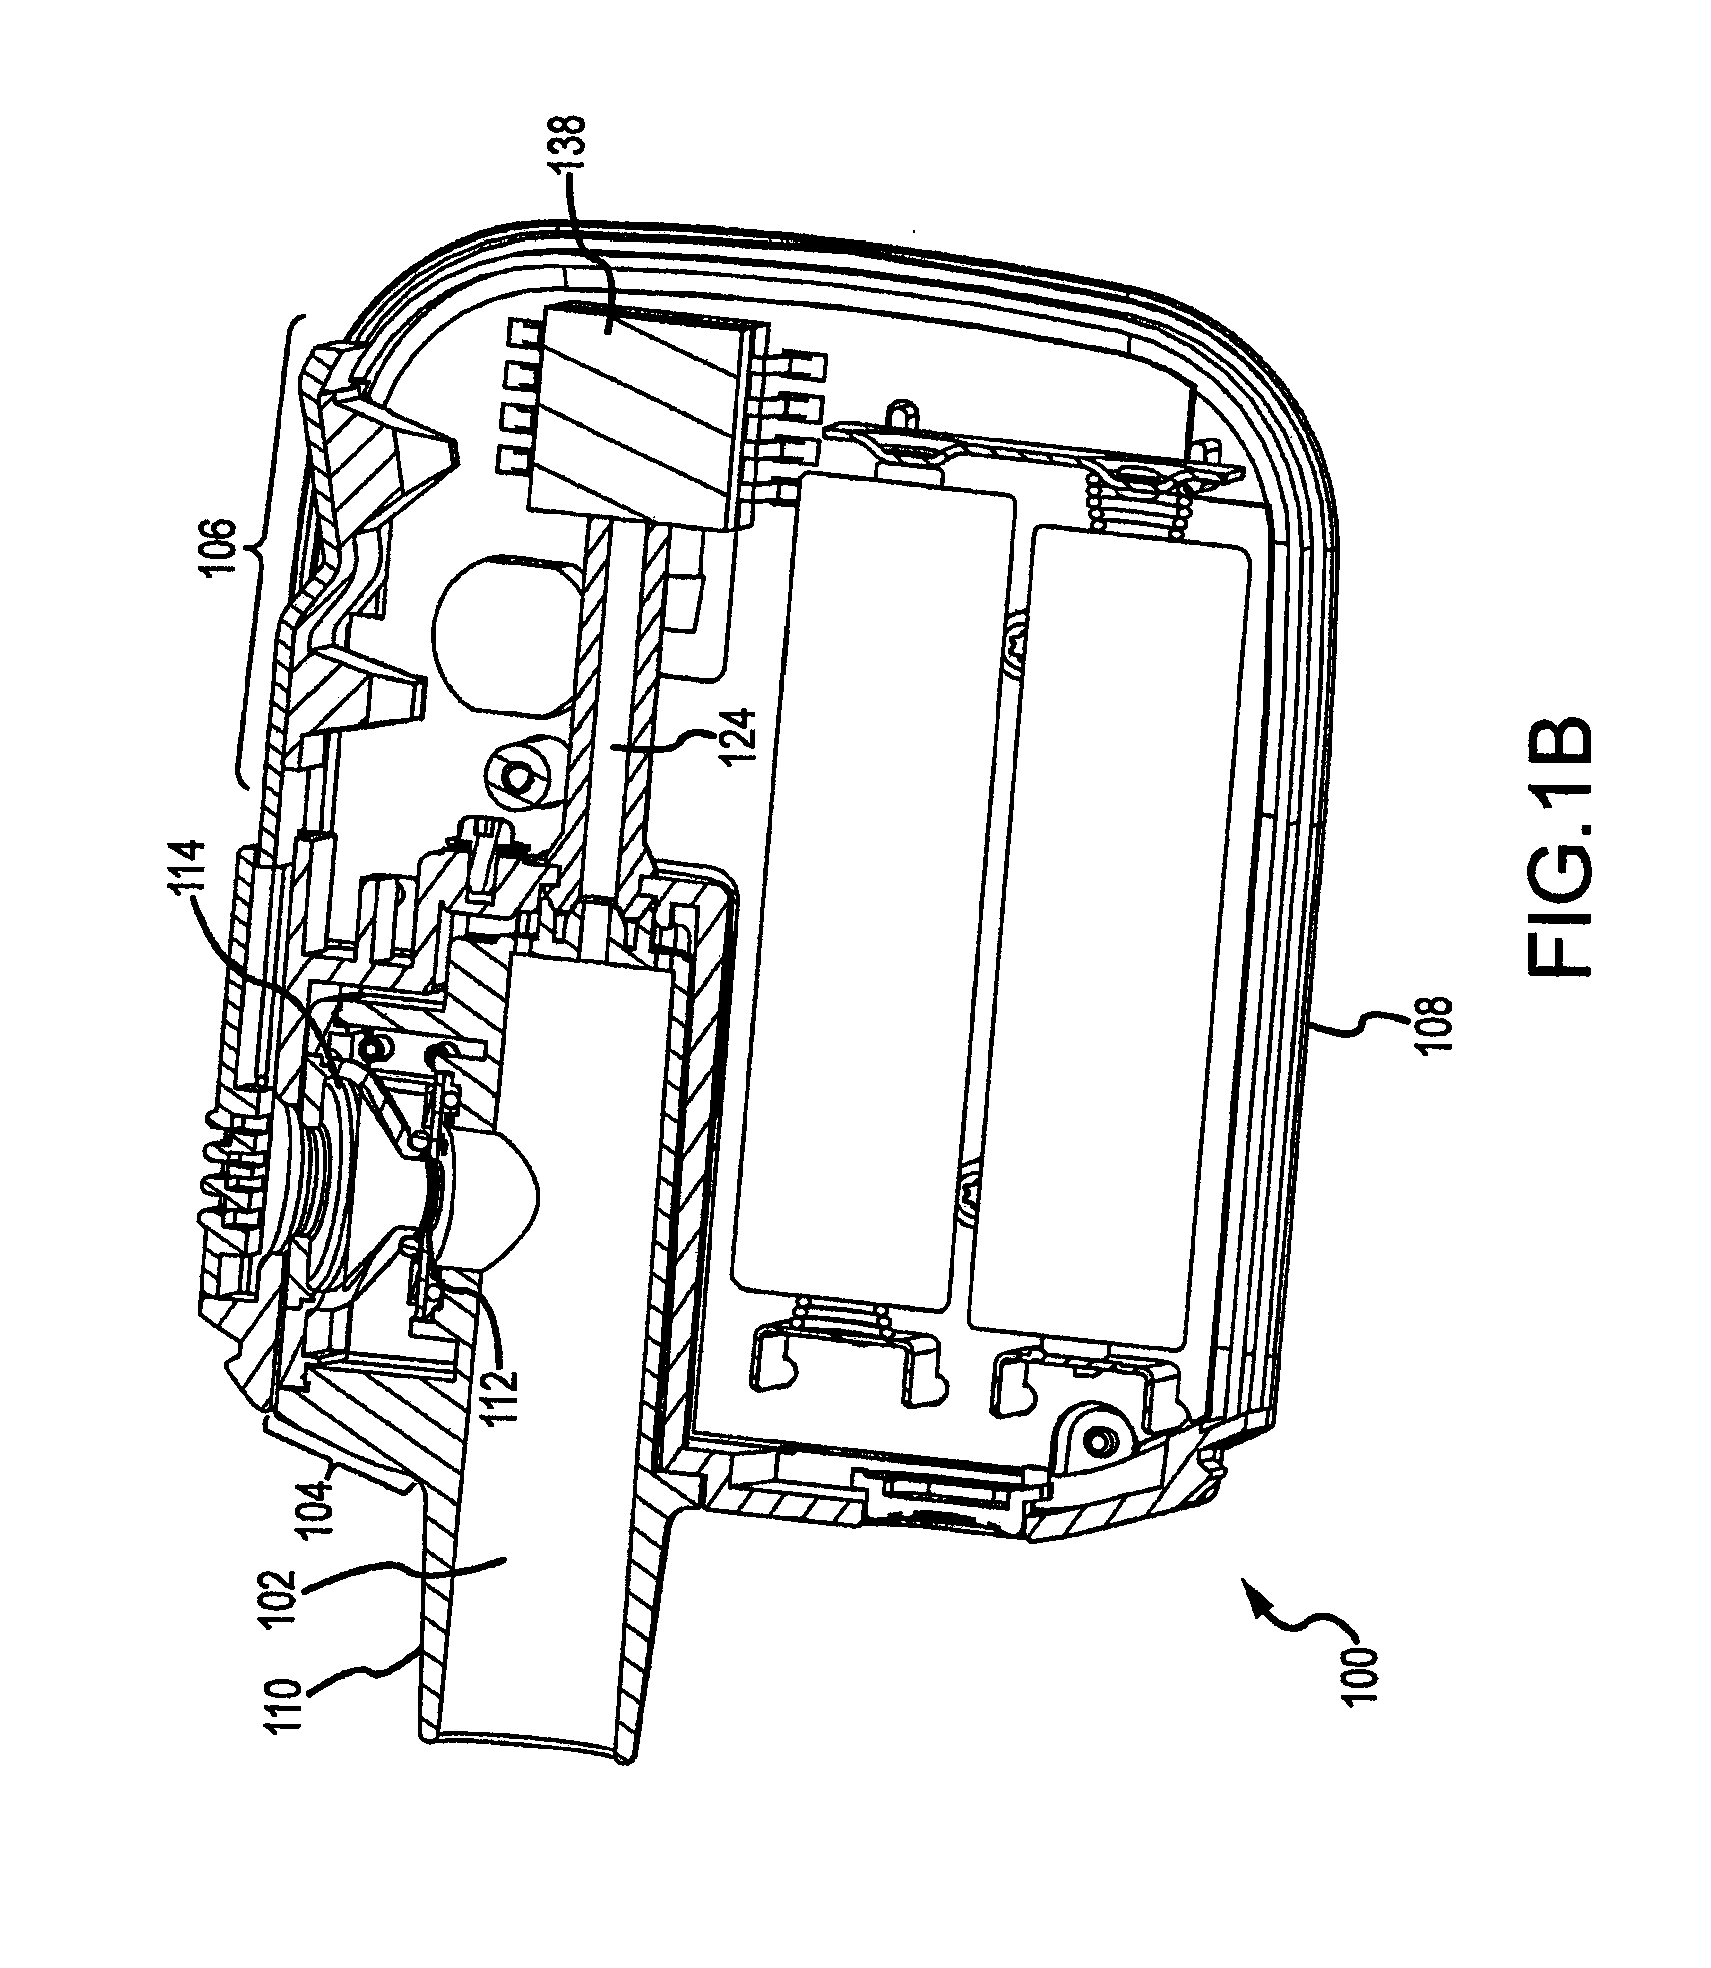 Aerosolization system with flow restrictor and feedback device